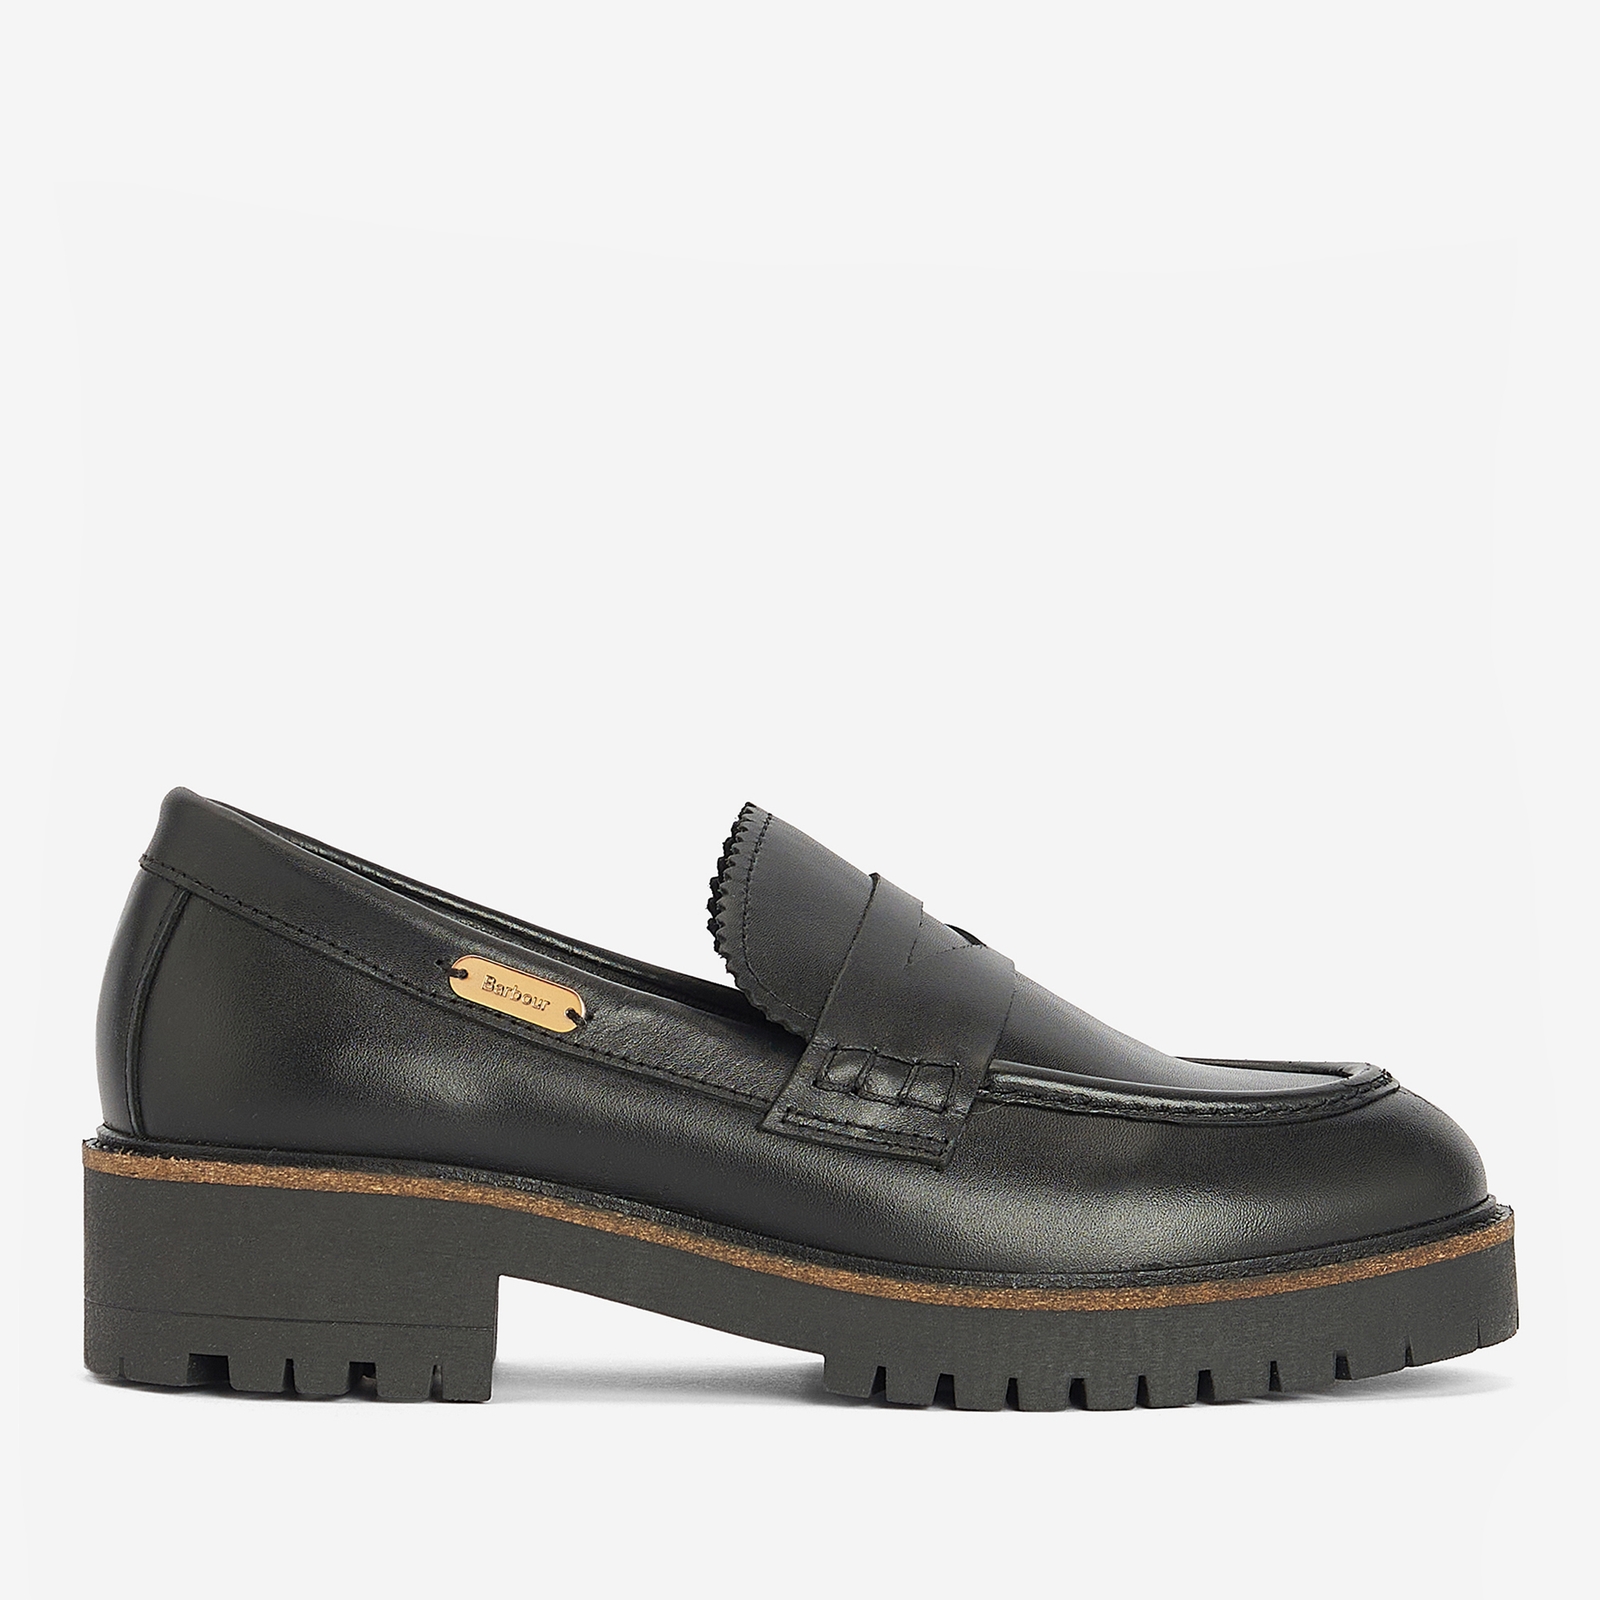 Barbour Women’s Norma Leather Loafers